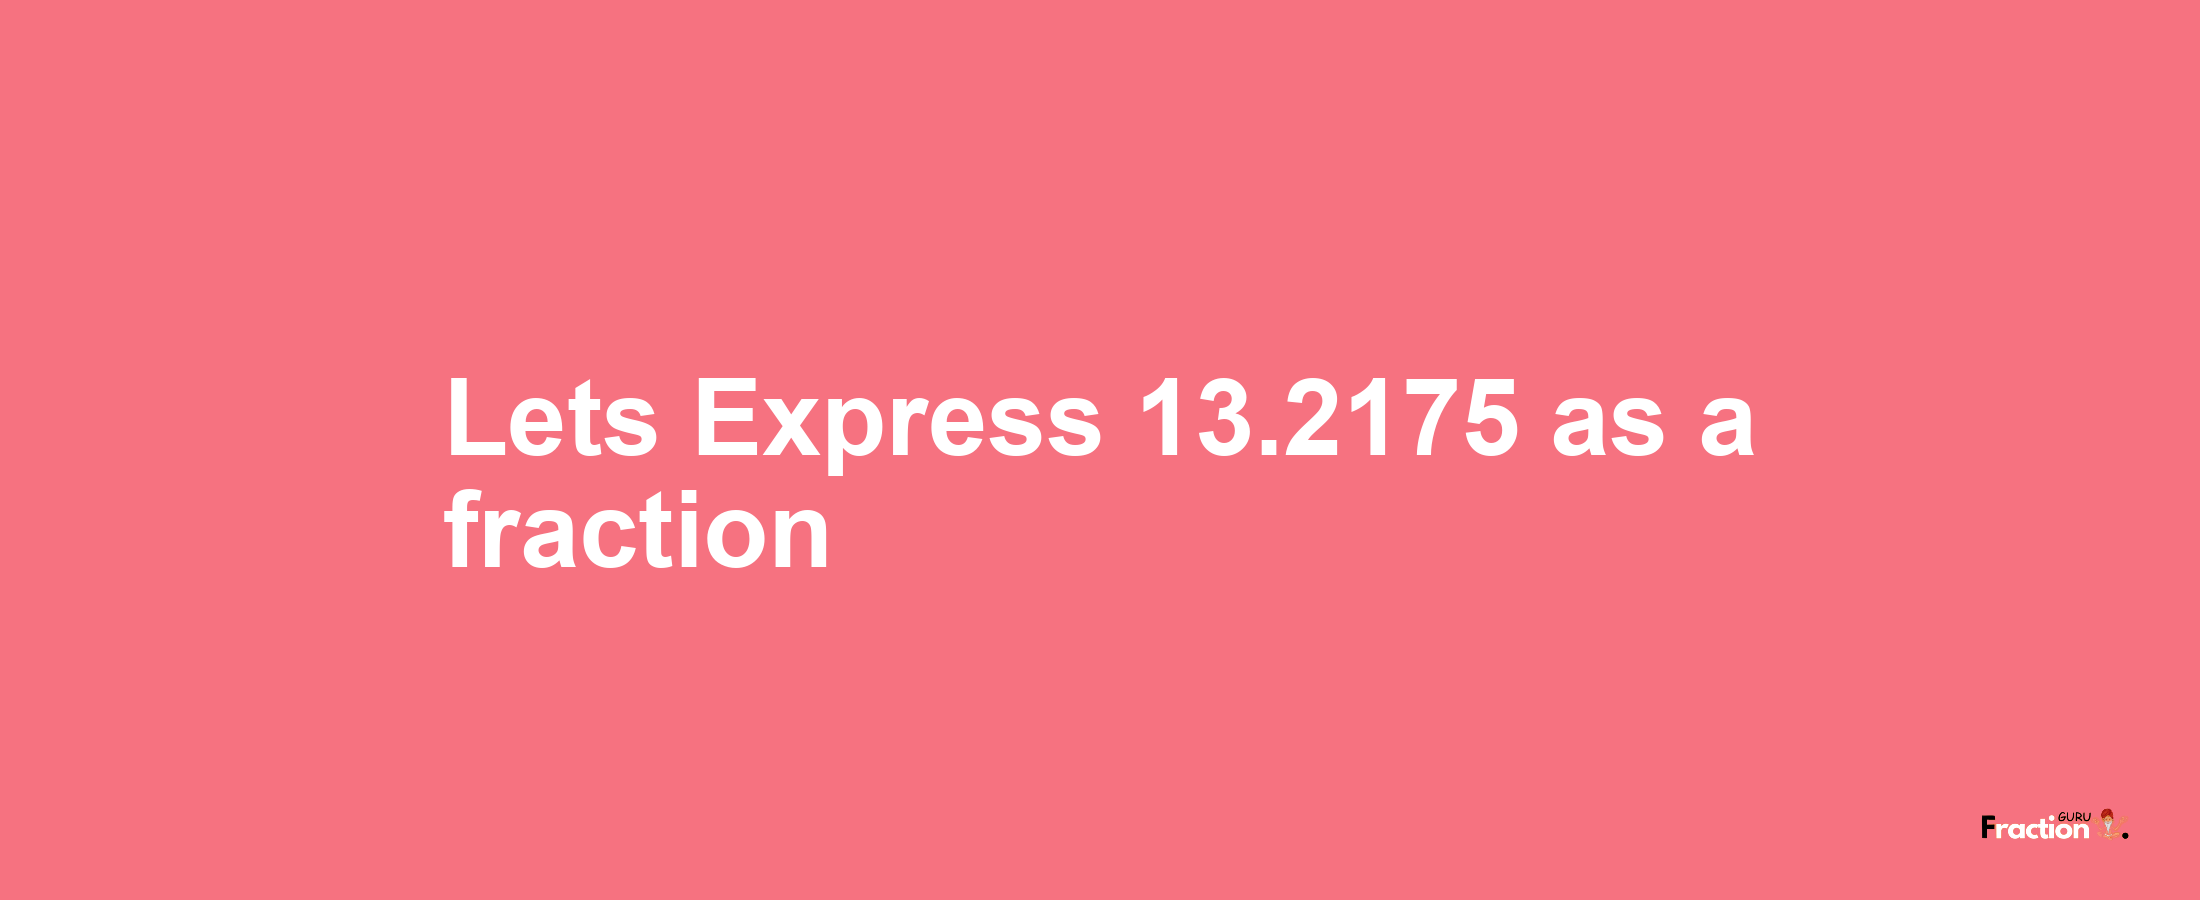 Lets Express 13.2175 as afraction